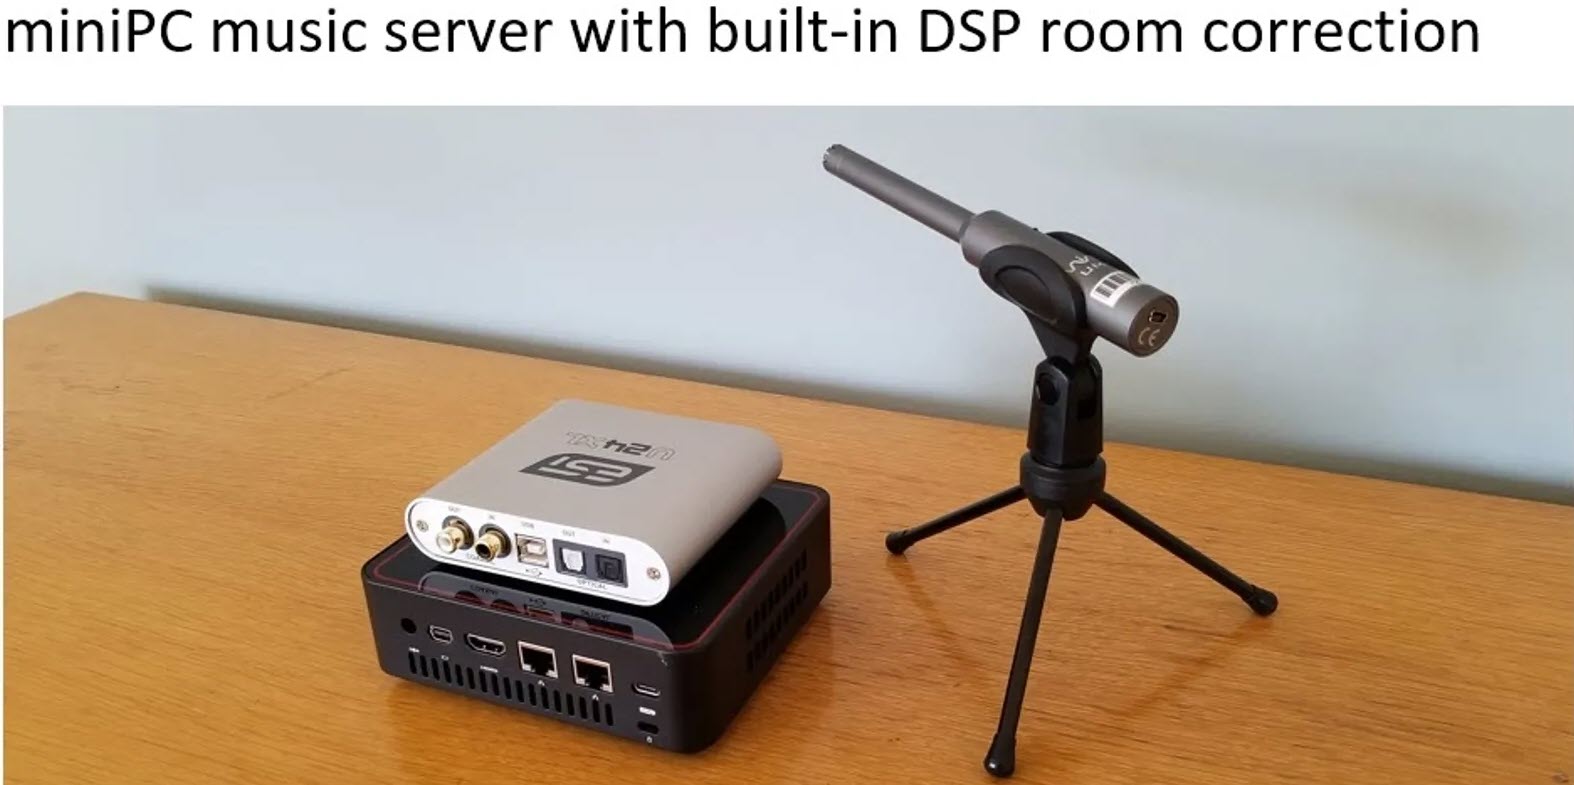 miniPC music server with built-in DSP room correction.jpg